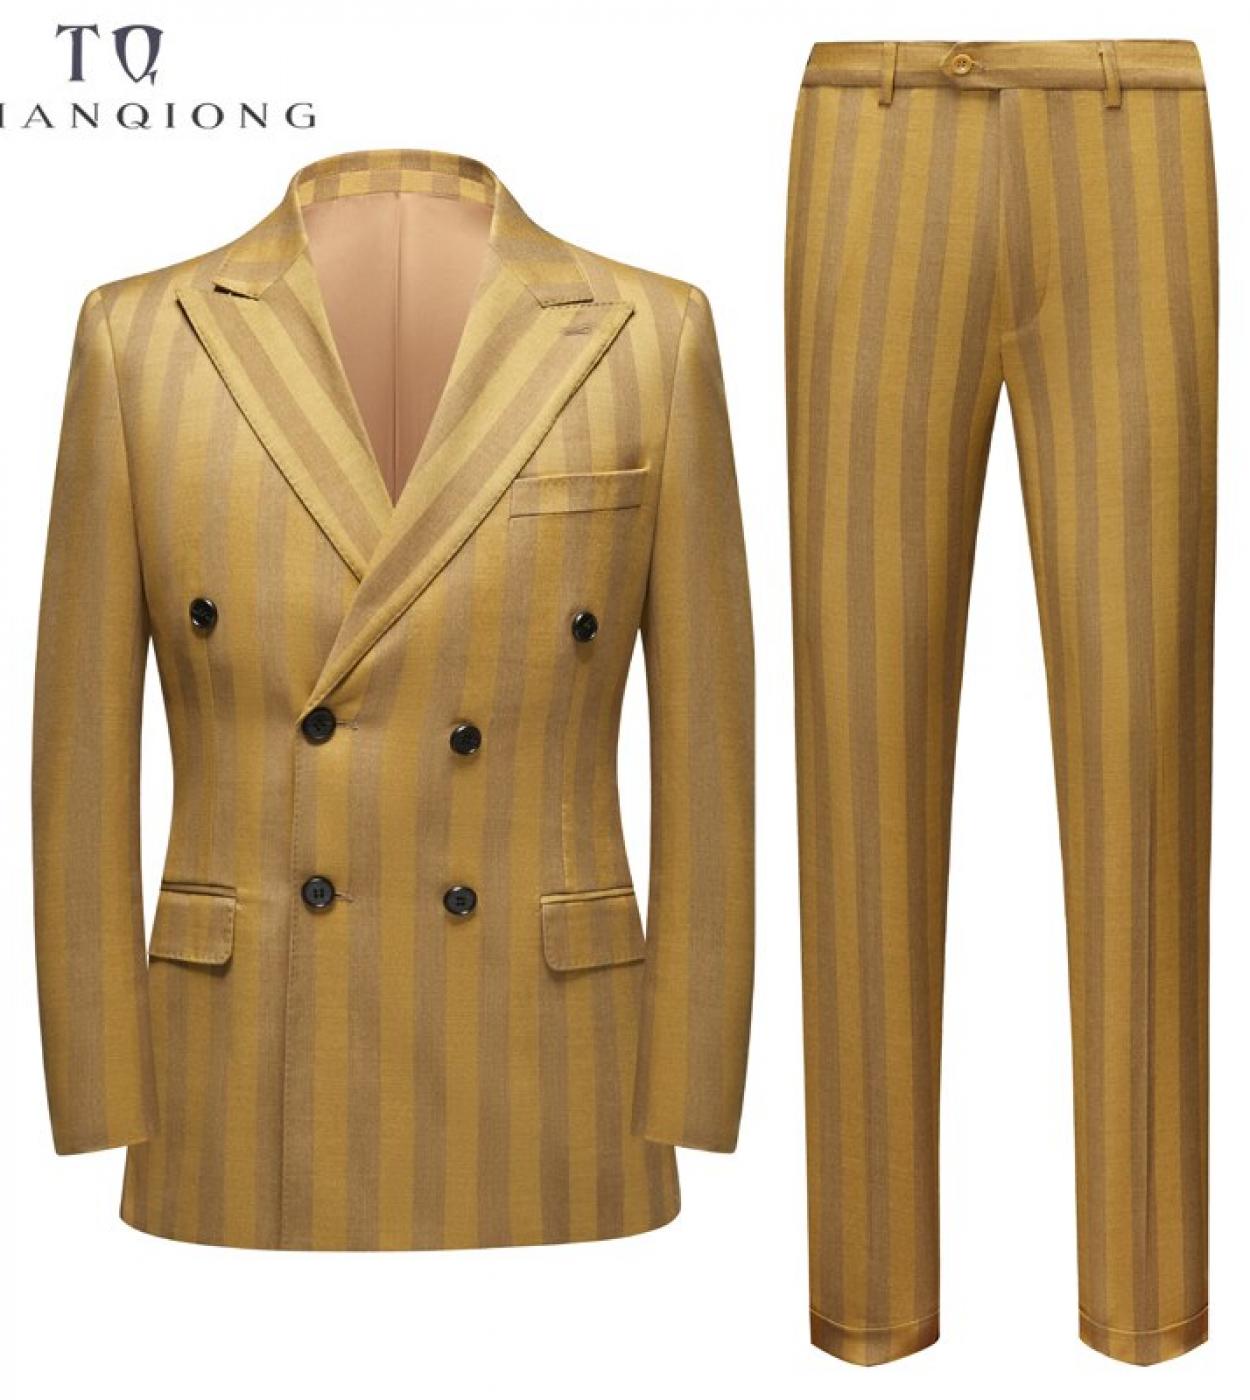 Tian Qiong 2022 Mens Casual Suit Mens Wedding Dresses Large Size Singlebreasted Yellow Striped Mens Formal Suit S6xl 